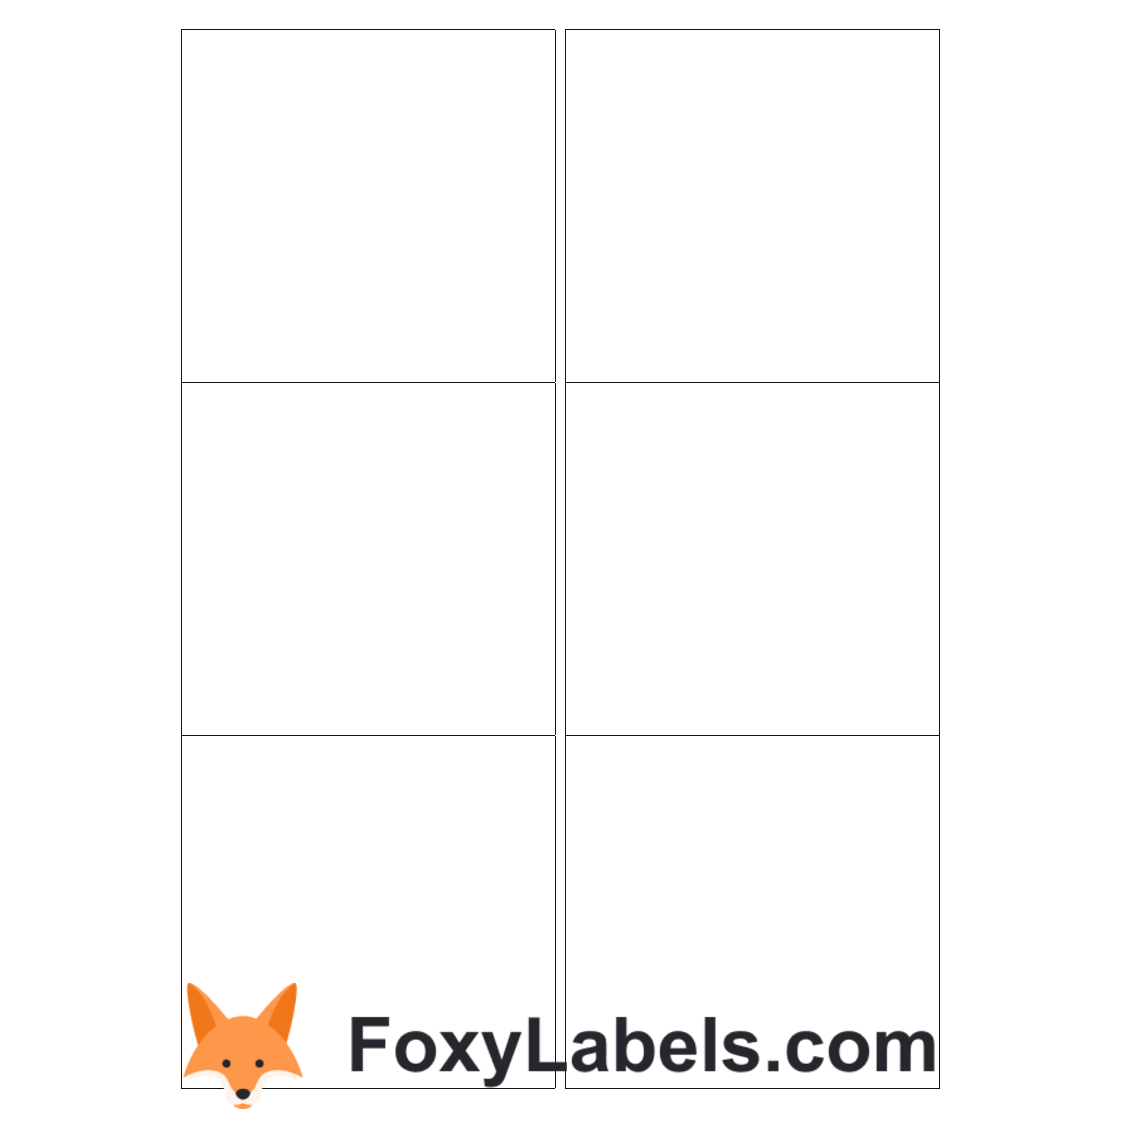 Avery J8166 label template for Google Docs